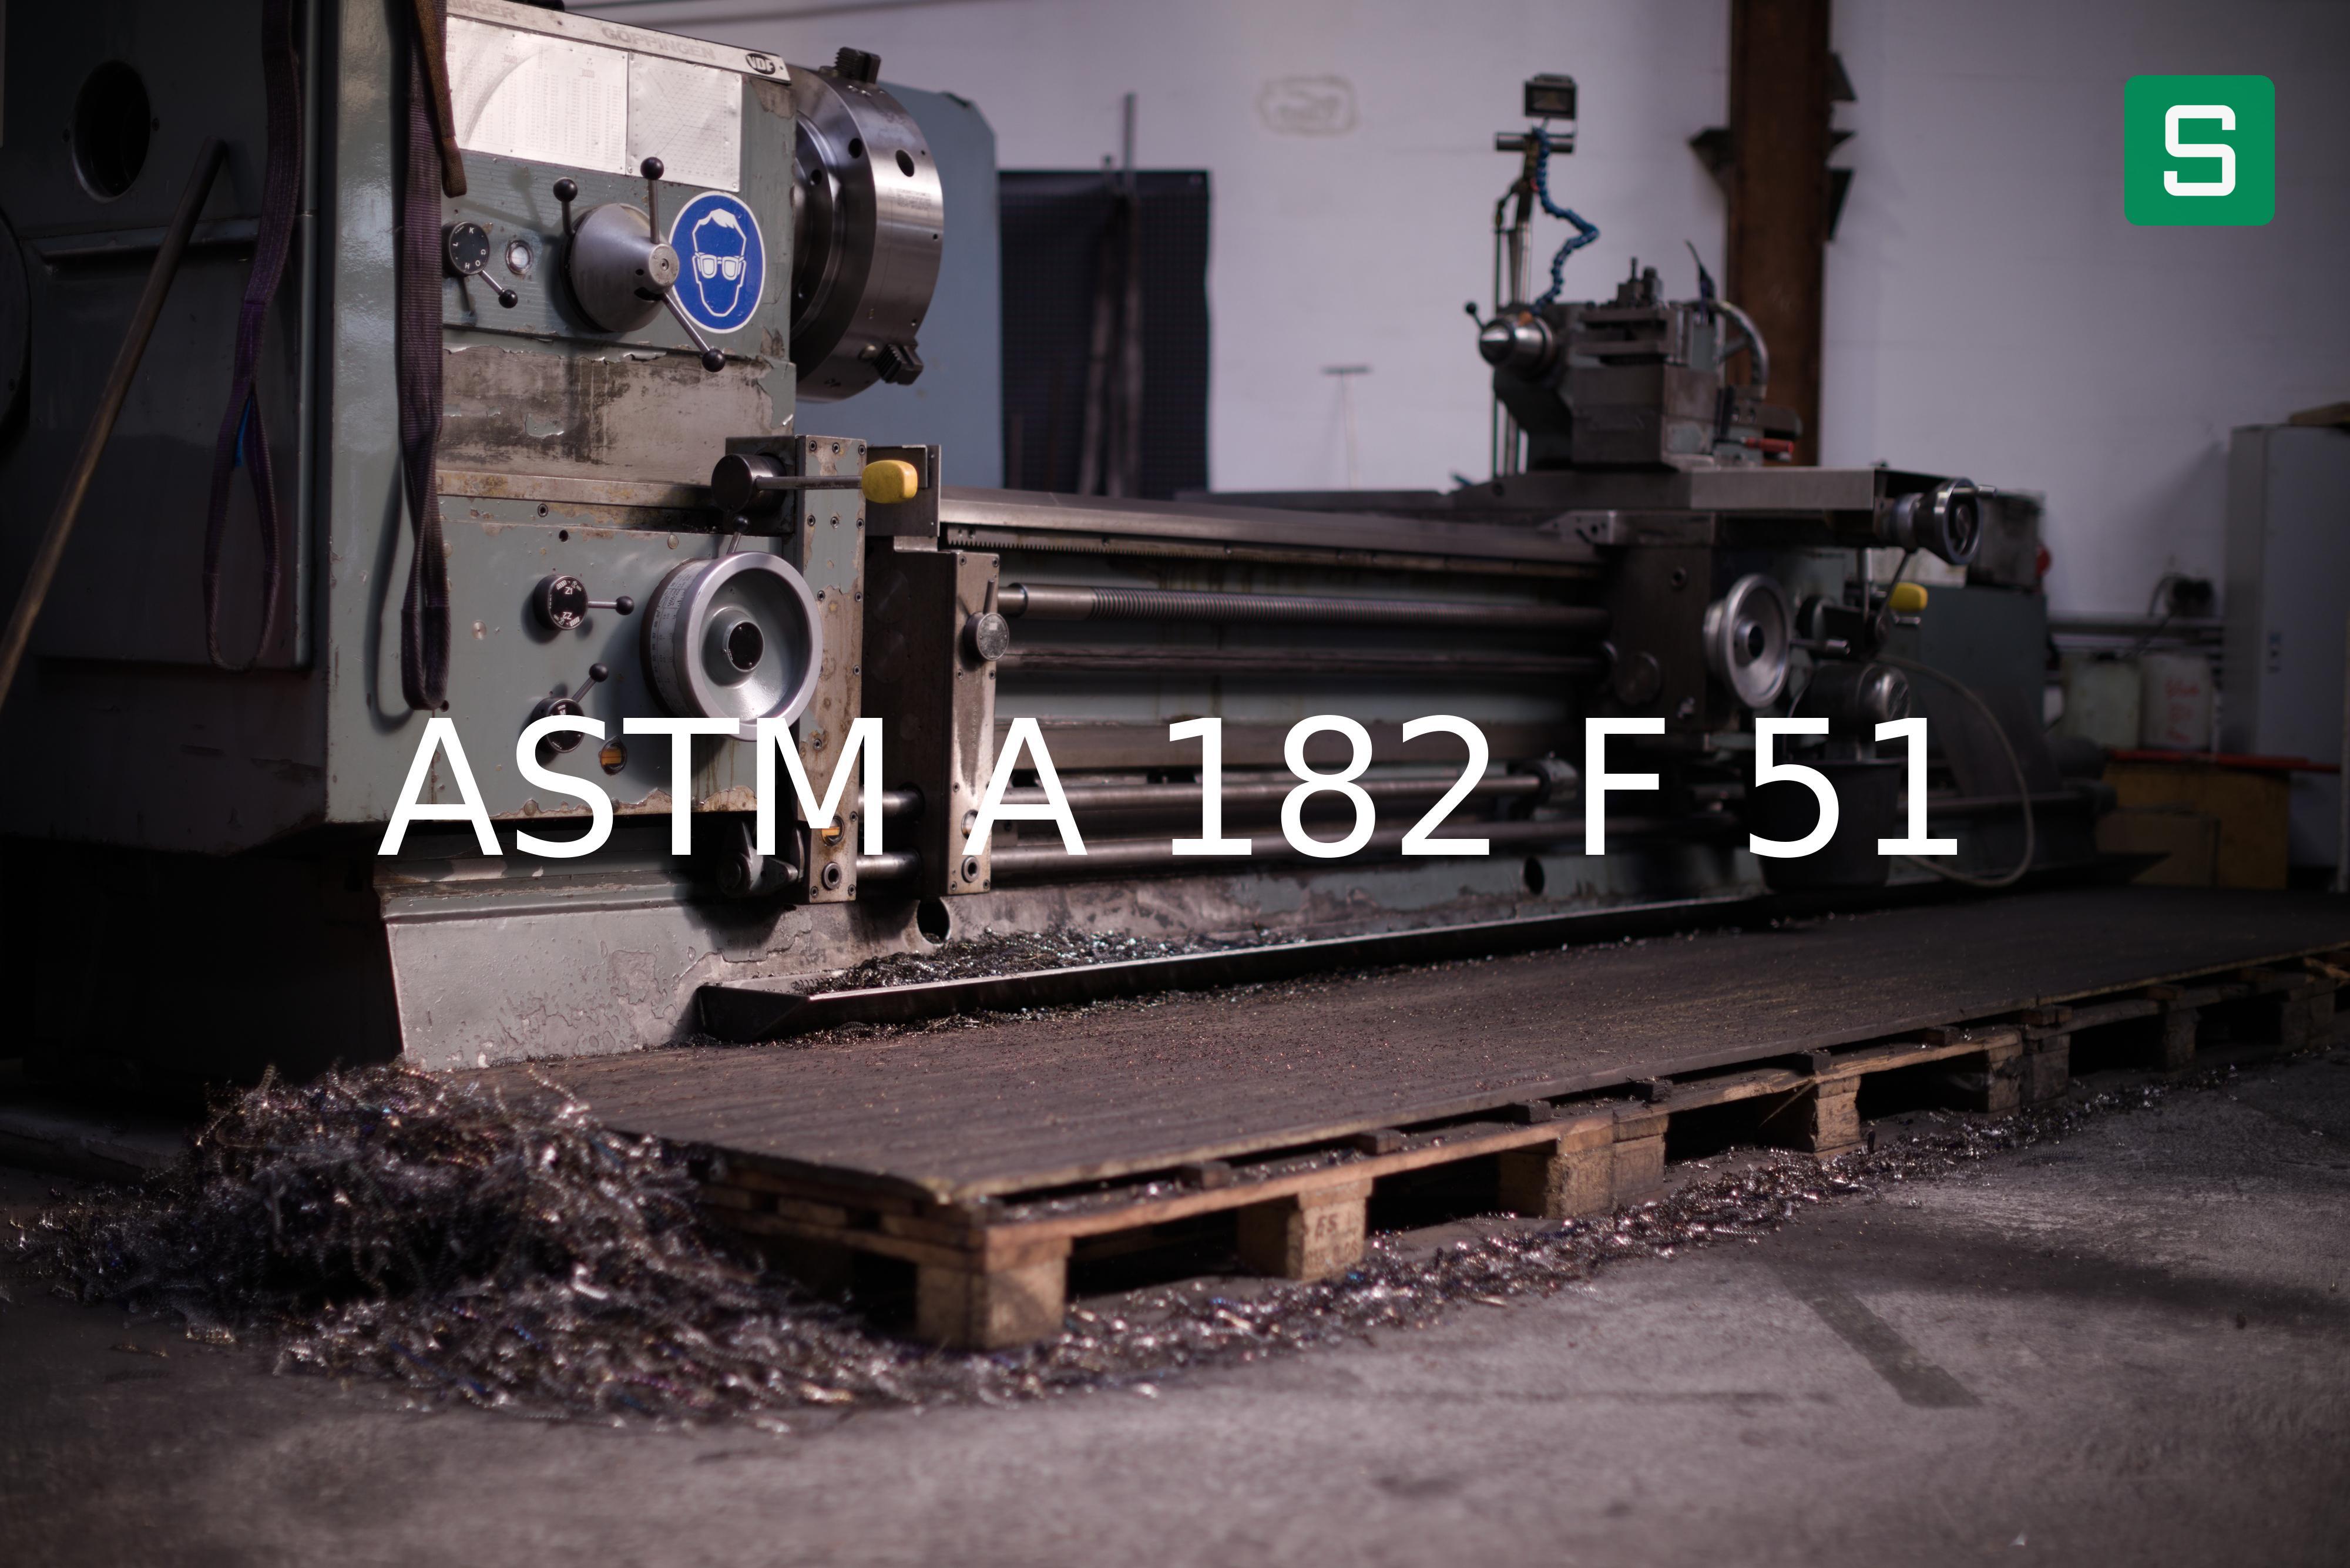 Steel Material: ASTM A 182 F 51